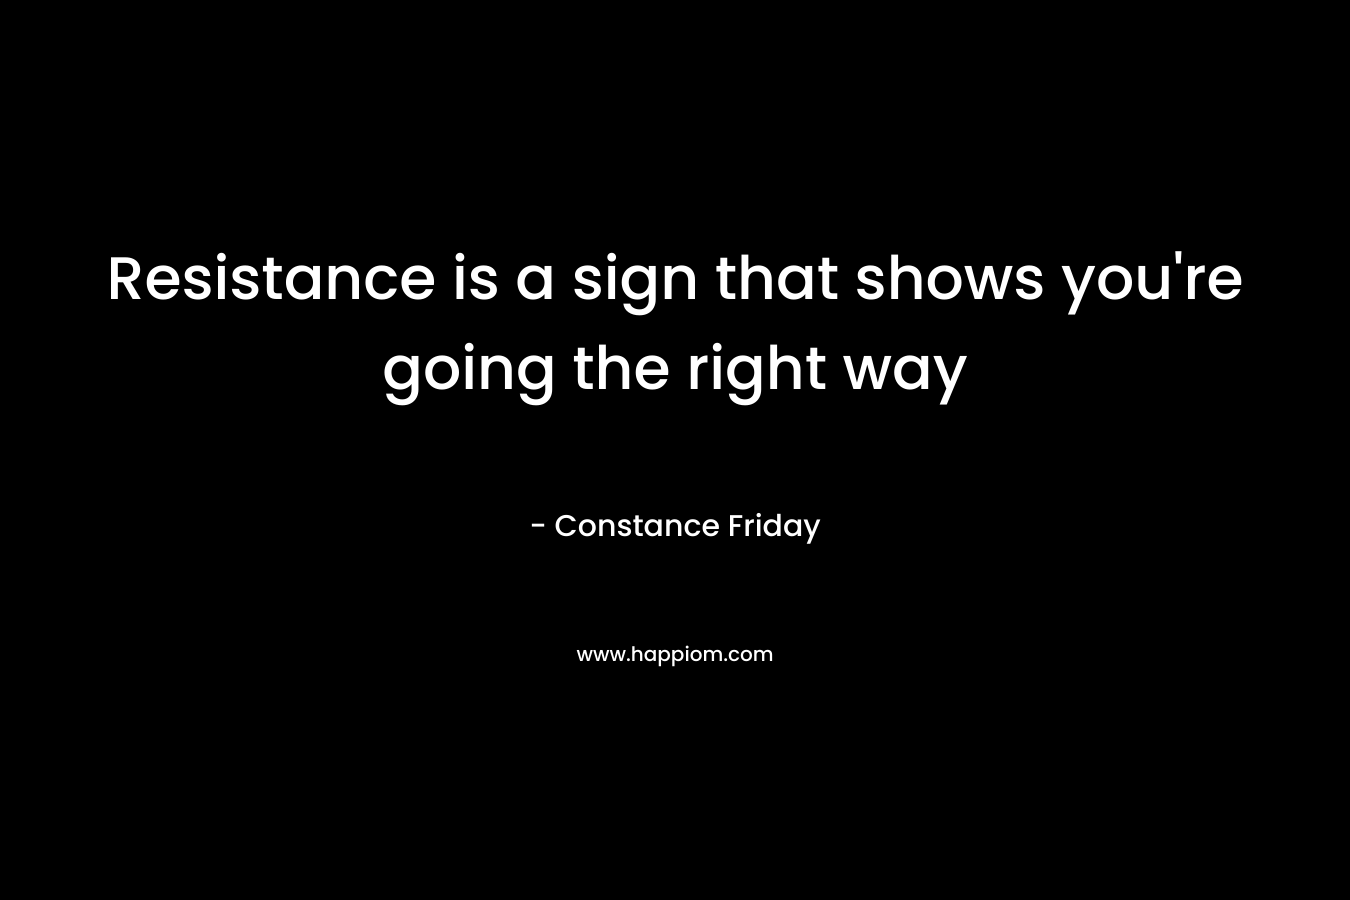 Resistance is a sign that shows you’re going the right way – Constance Friday